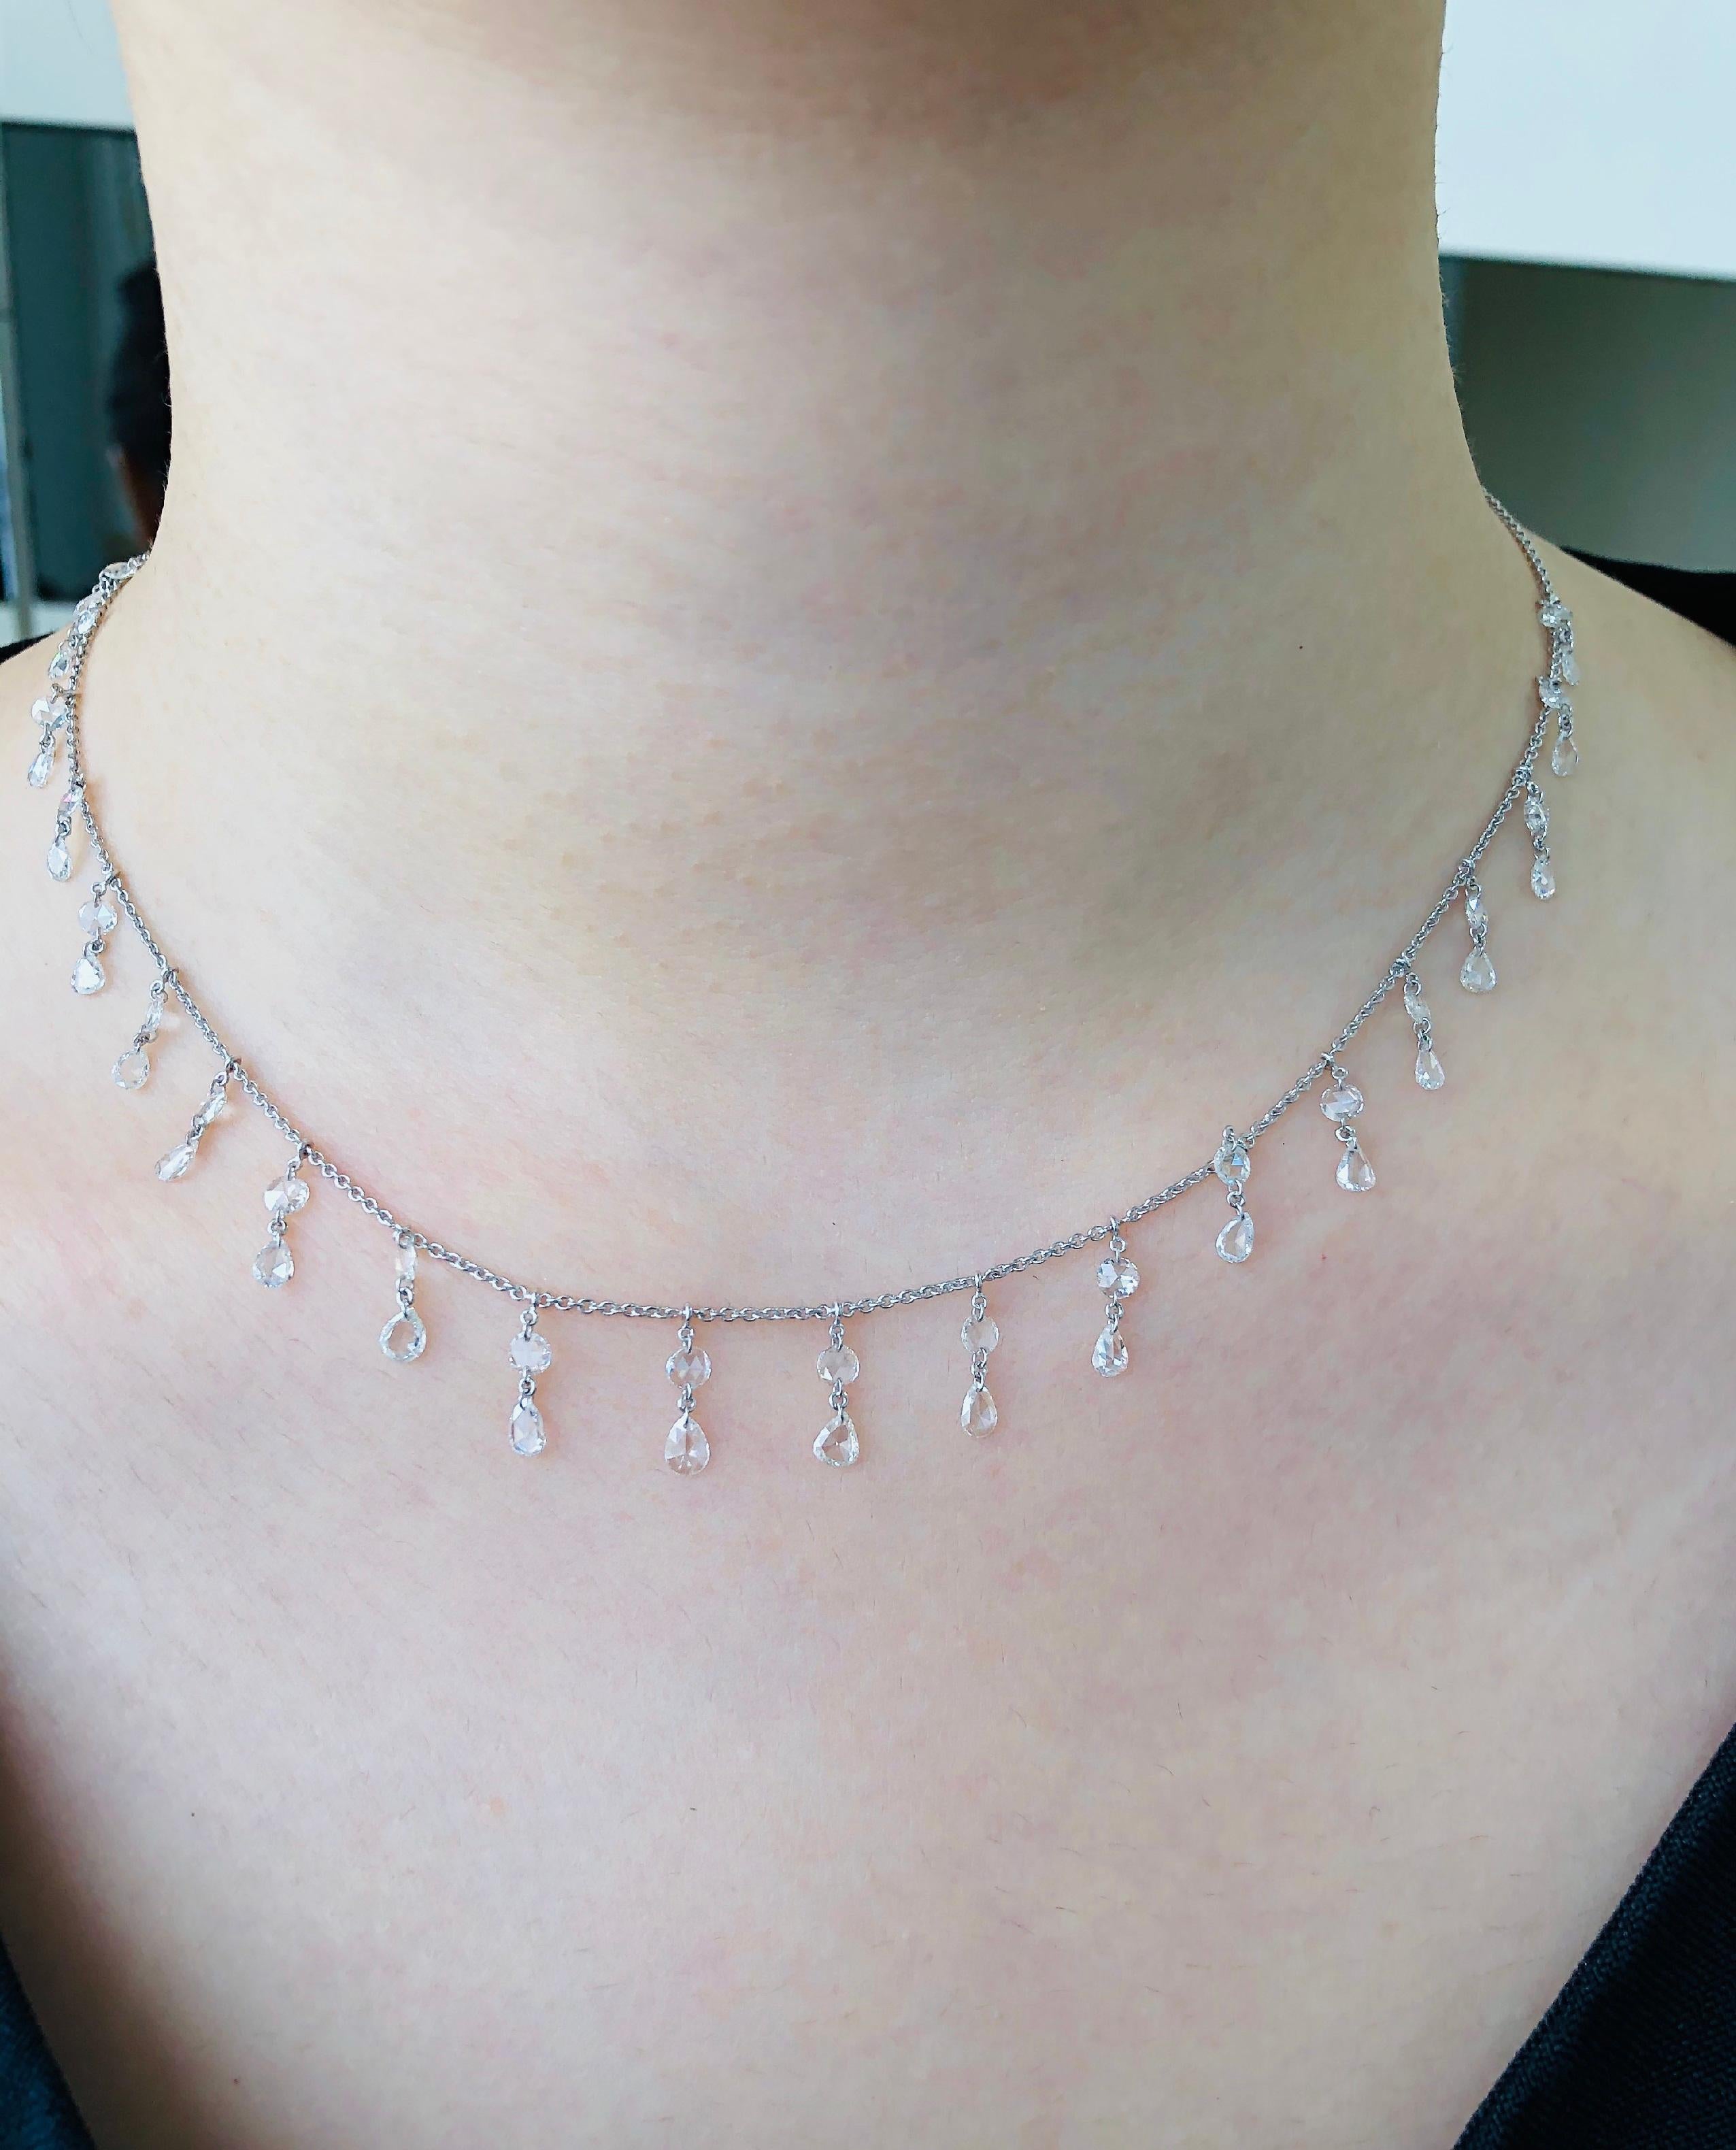 JR 3.14 Carat Rose Cut Diamond Dangling Choker Necklace 

Dress your neck with our beautiful choker made with exquisite diamonds. This fancy piece is classy yet modern. It has slider ball near the clasp to adjust the length from 14 Inch to 18